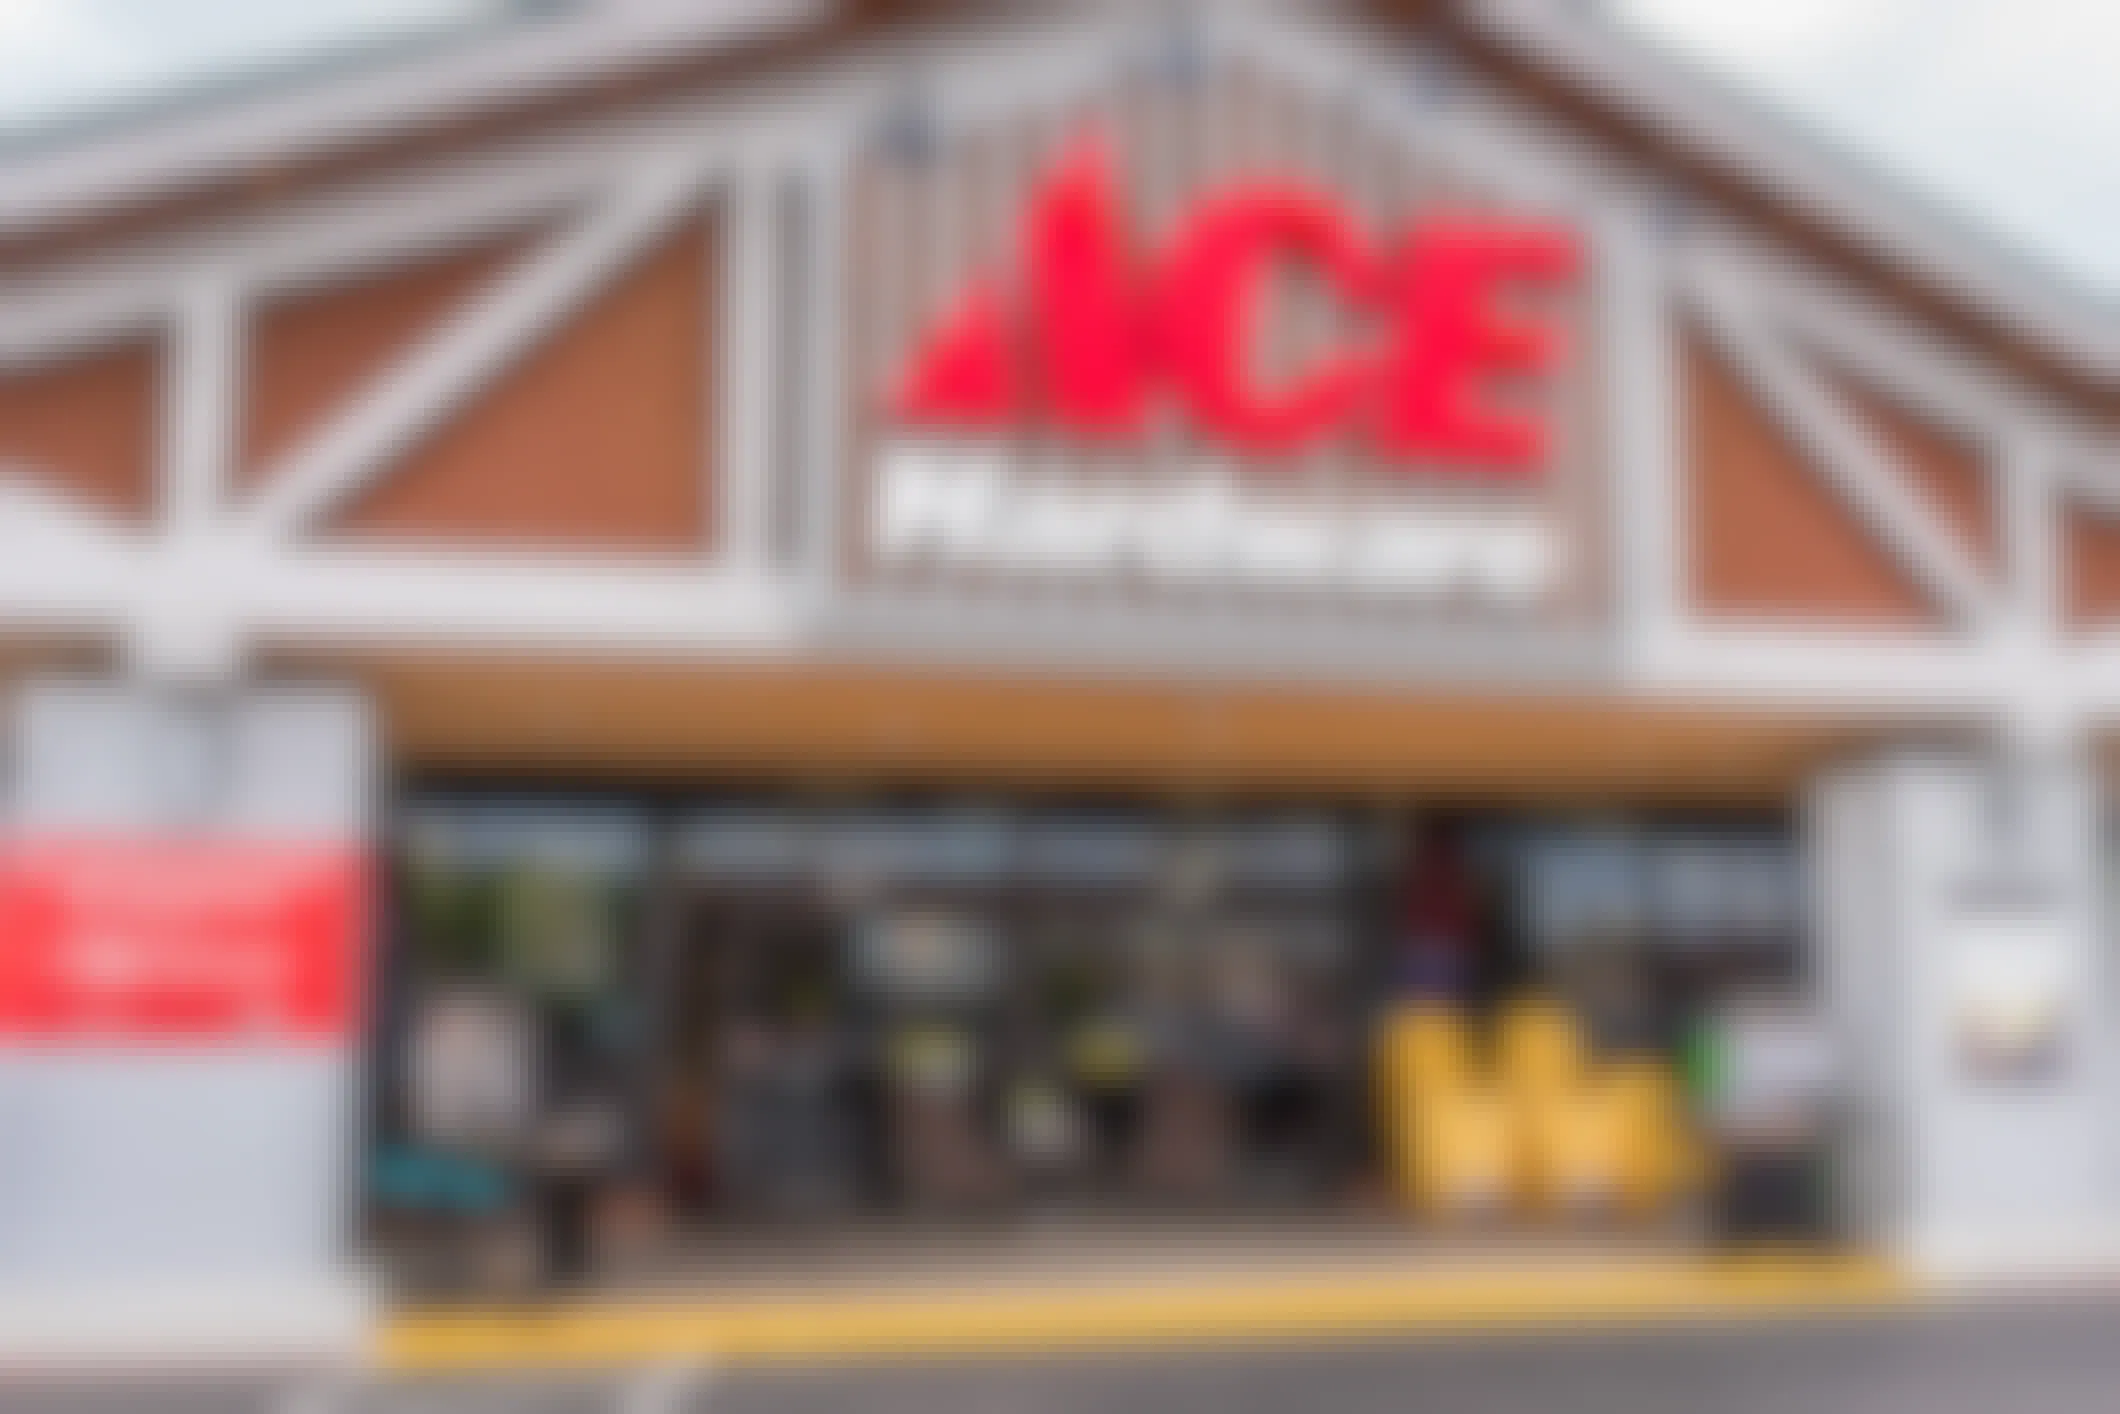 An Ace Hardware store entrance with outdoor chairs and grills on display